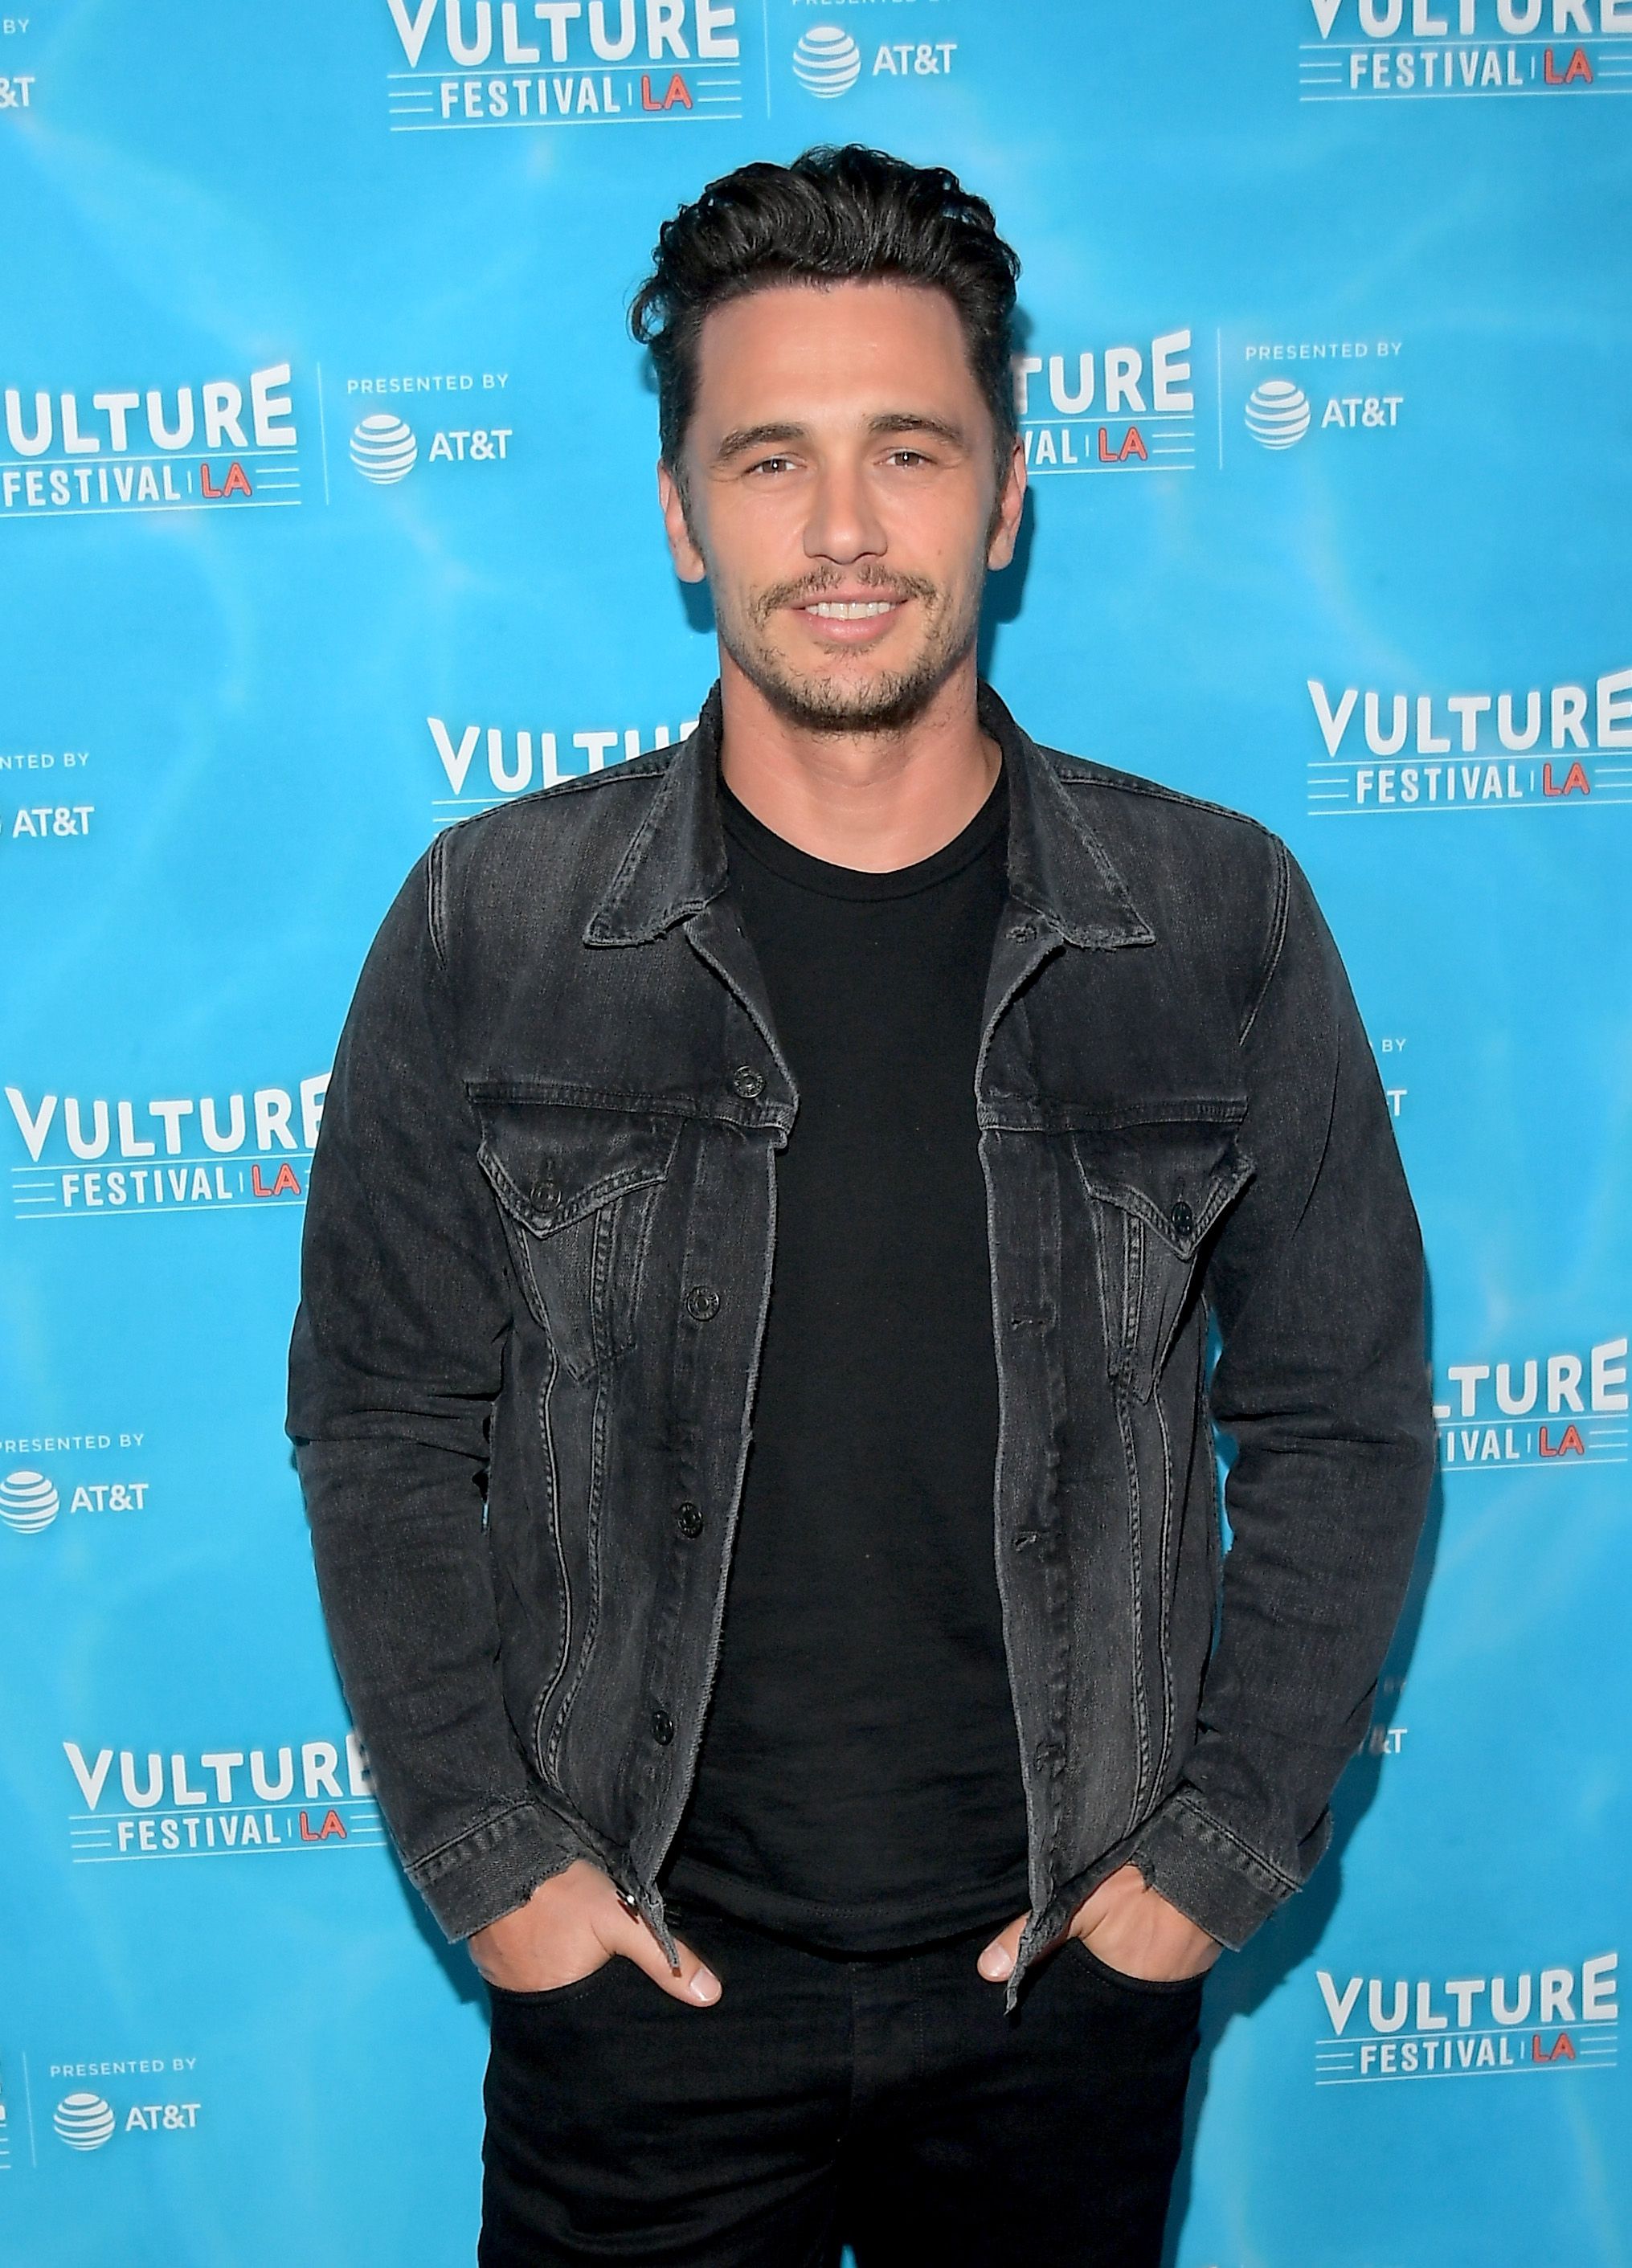  James Franco during the 'Disaster Artist' panel during Vulture Festival LA Presented by AT&T at Hollywood Roosevelt Hotel on November 18, 2017 in Hollywood, California. | Source: Getty Images